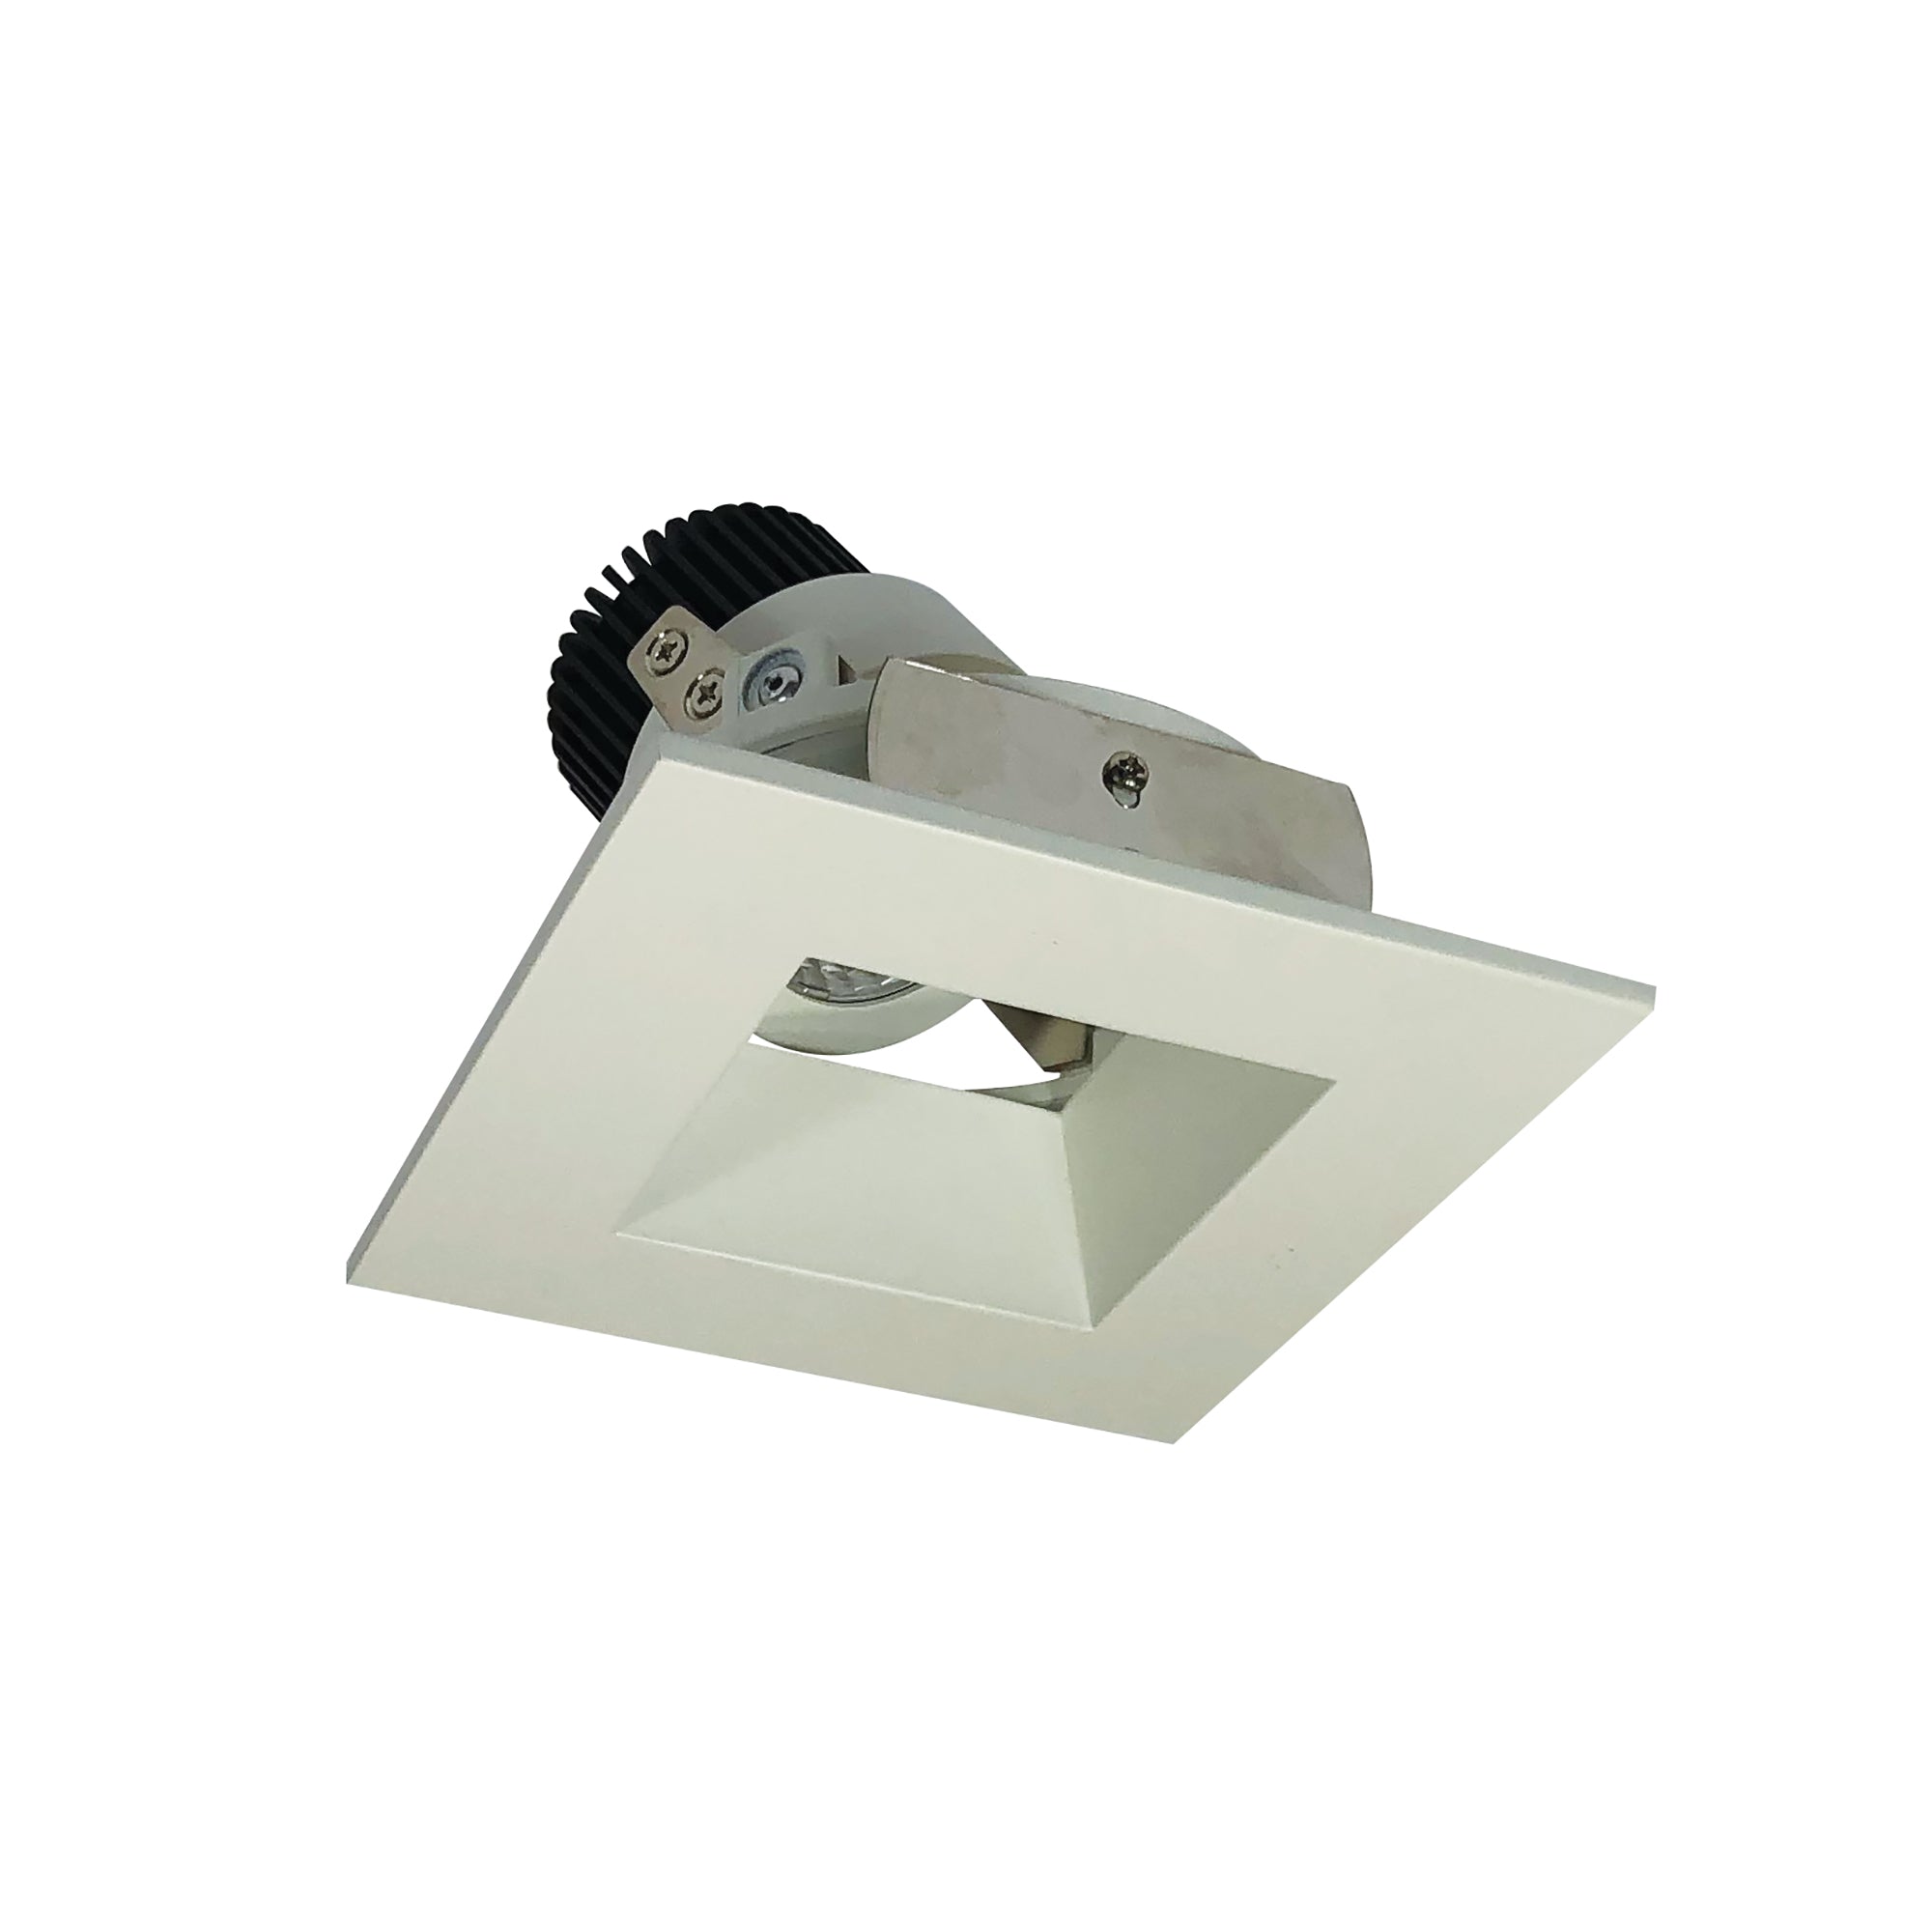 Nora Lighting NIO-4SDSQ30XWW/10 4" Iolite LED Square Adjustable Reflector With Square Aperture, 1000lm / 14W, 3000K - White Reflector / White Flange